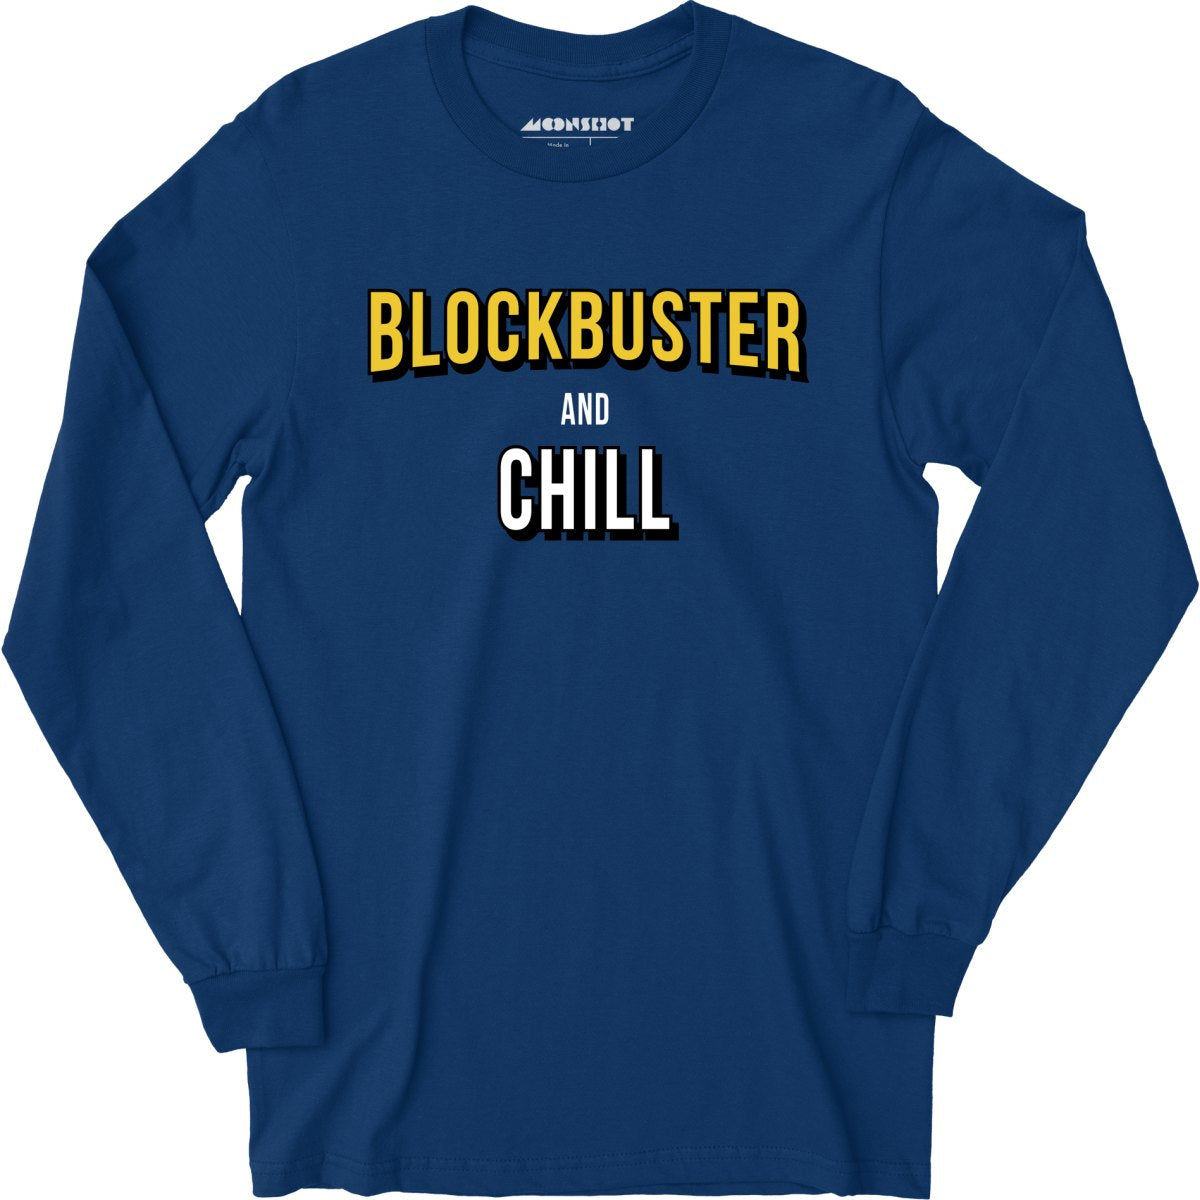 Blockbuster and Chill - Long Sleeve T-Shirt